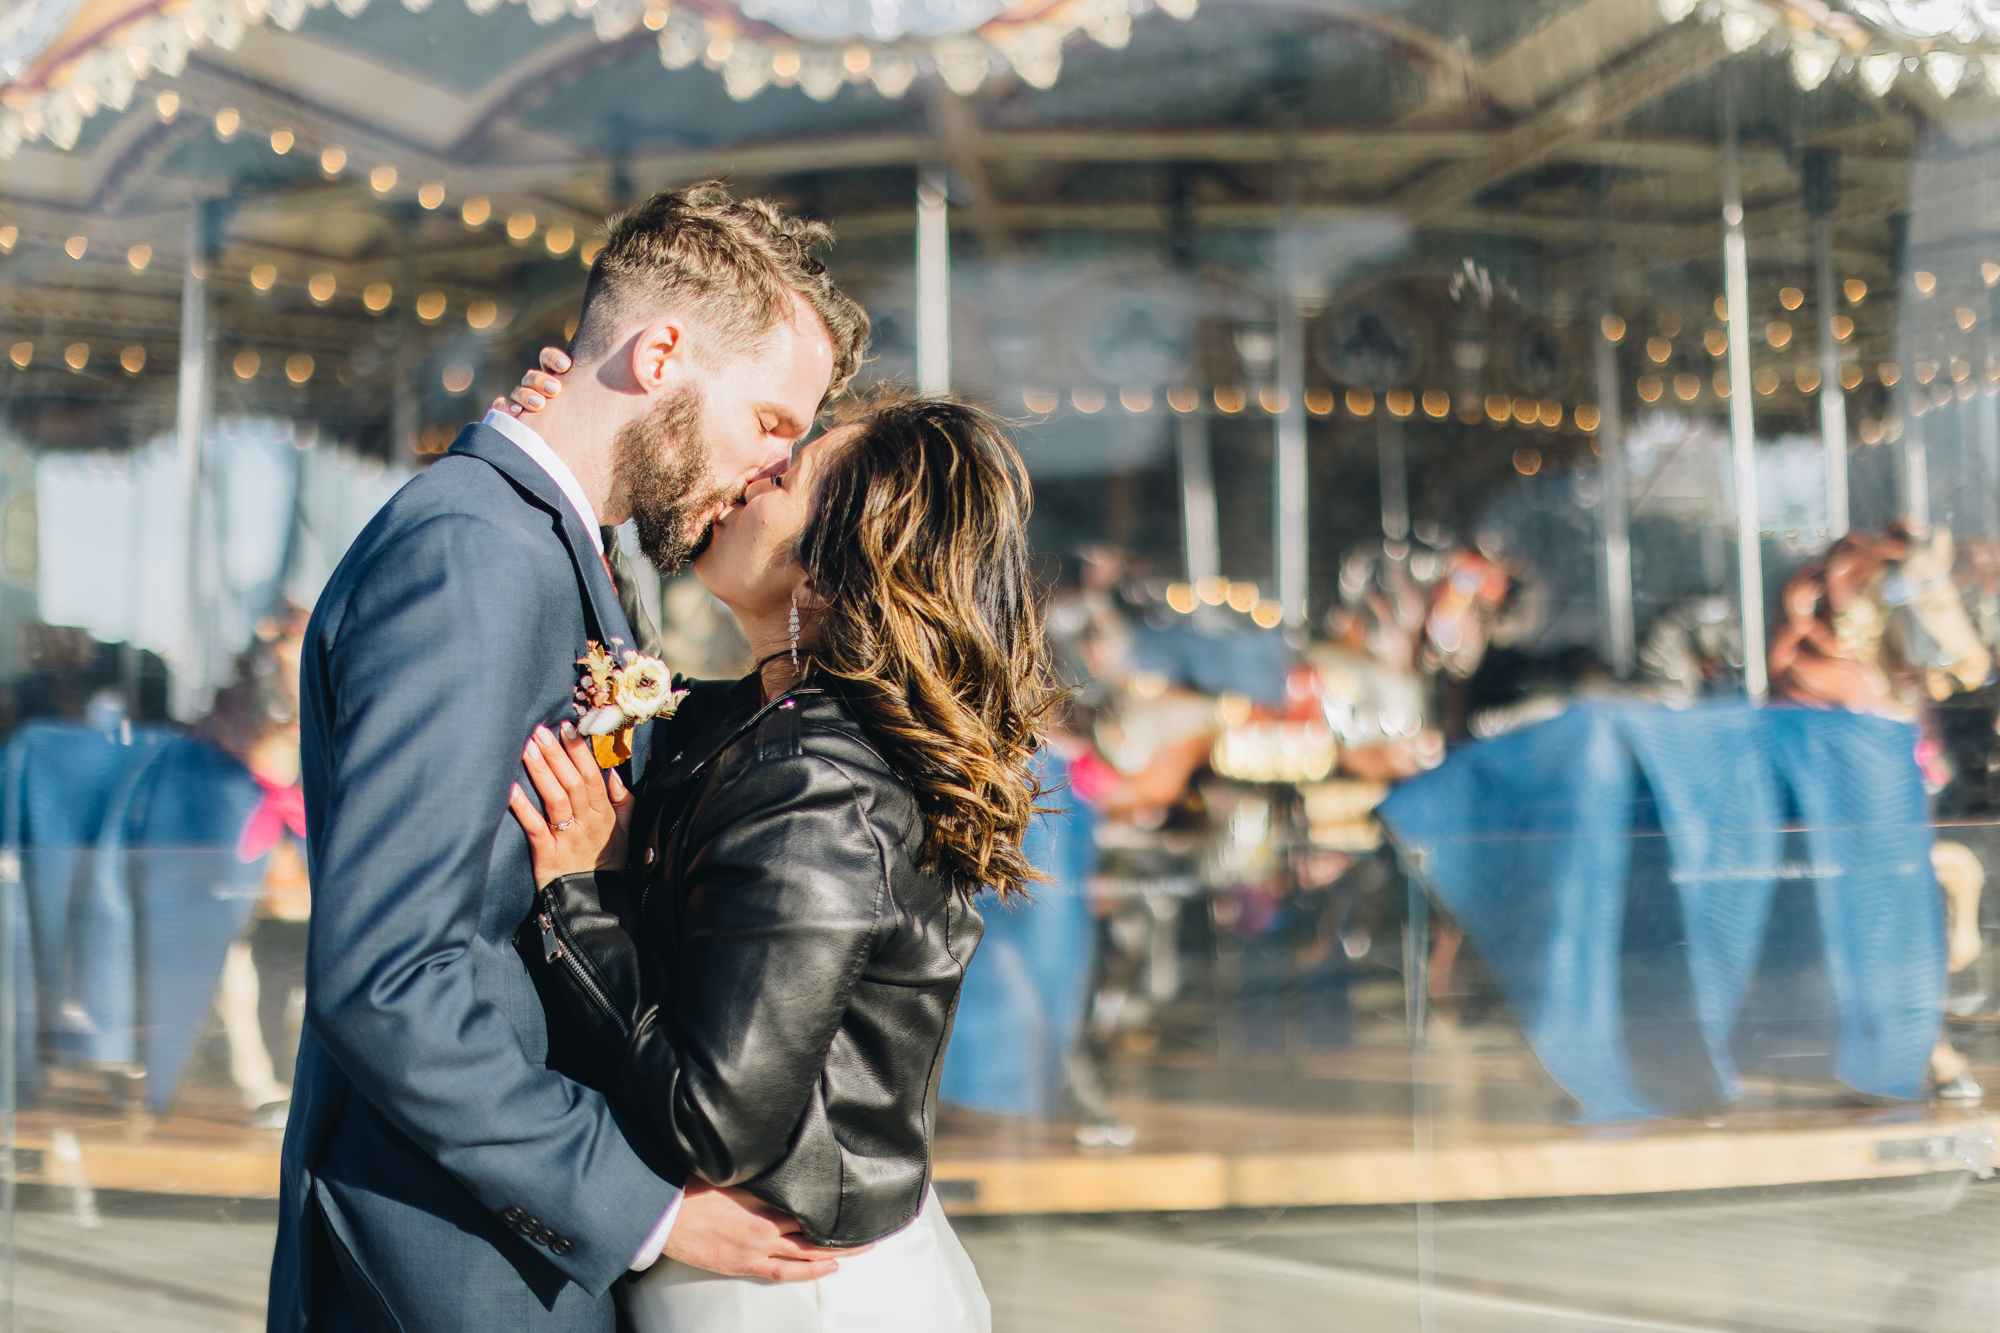 Fun Fall DUMBO Elopement with NYC views and foliage